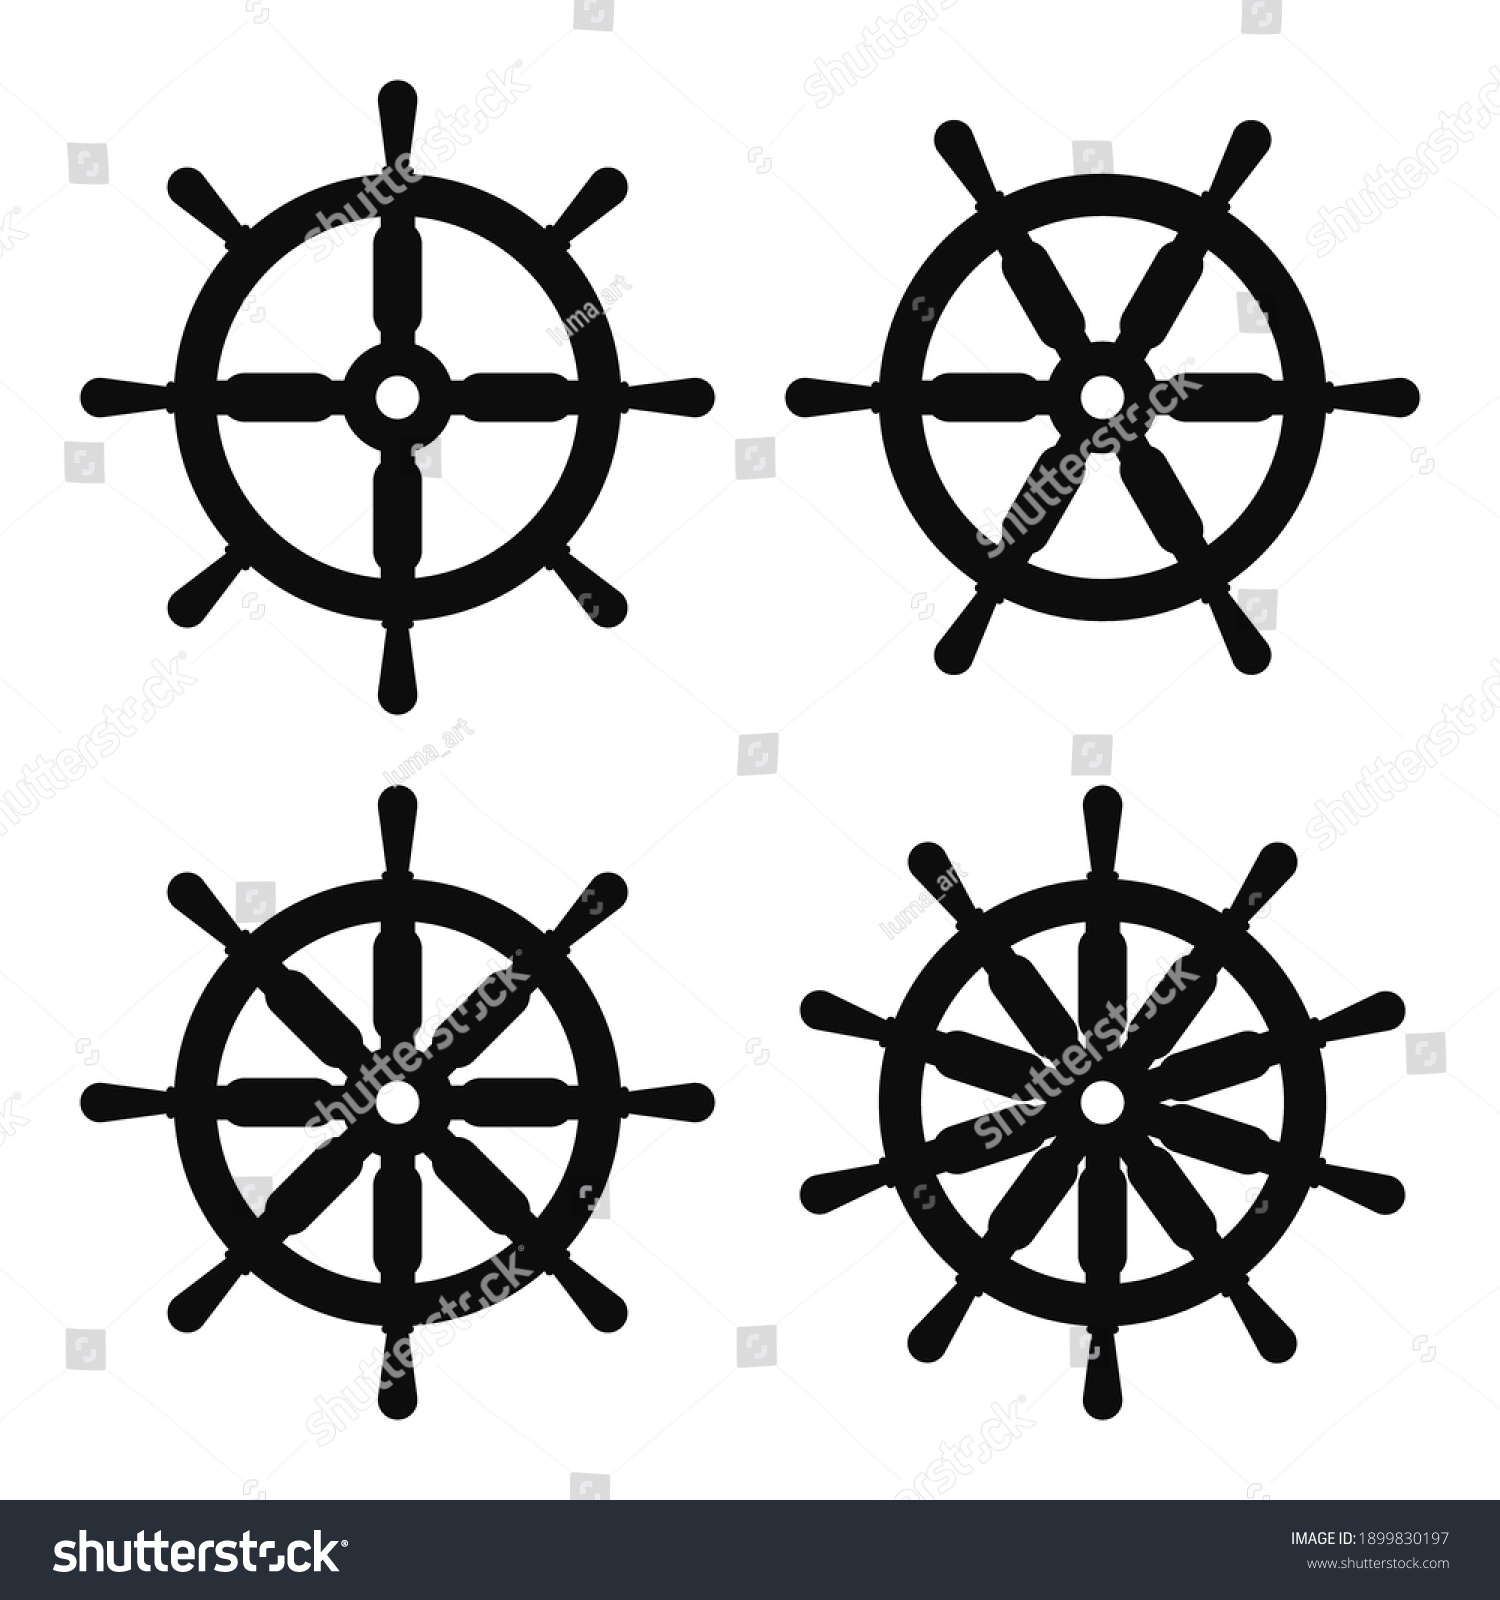 SVG of Vector illustration set of four ship steering wheel icons - Black symbols isolated on white svg